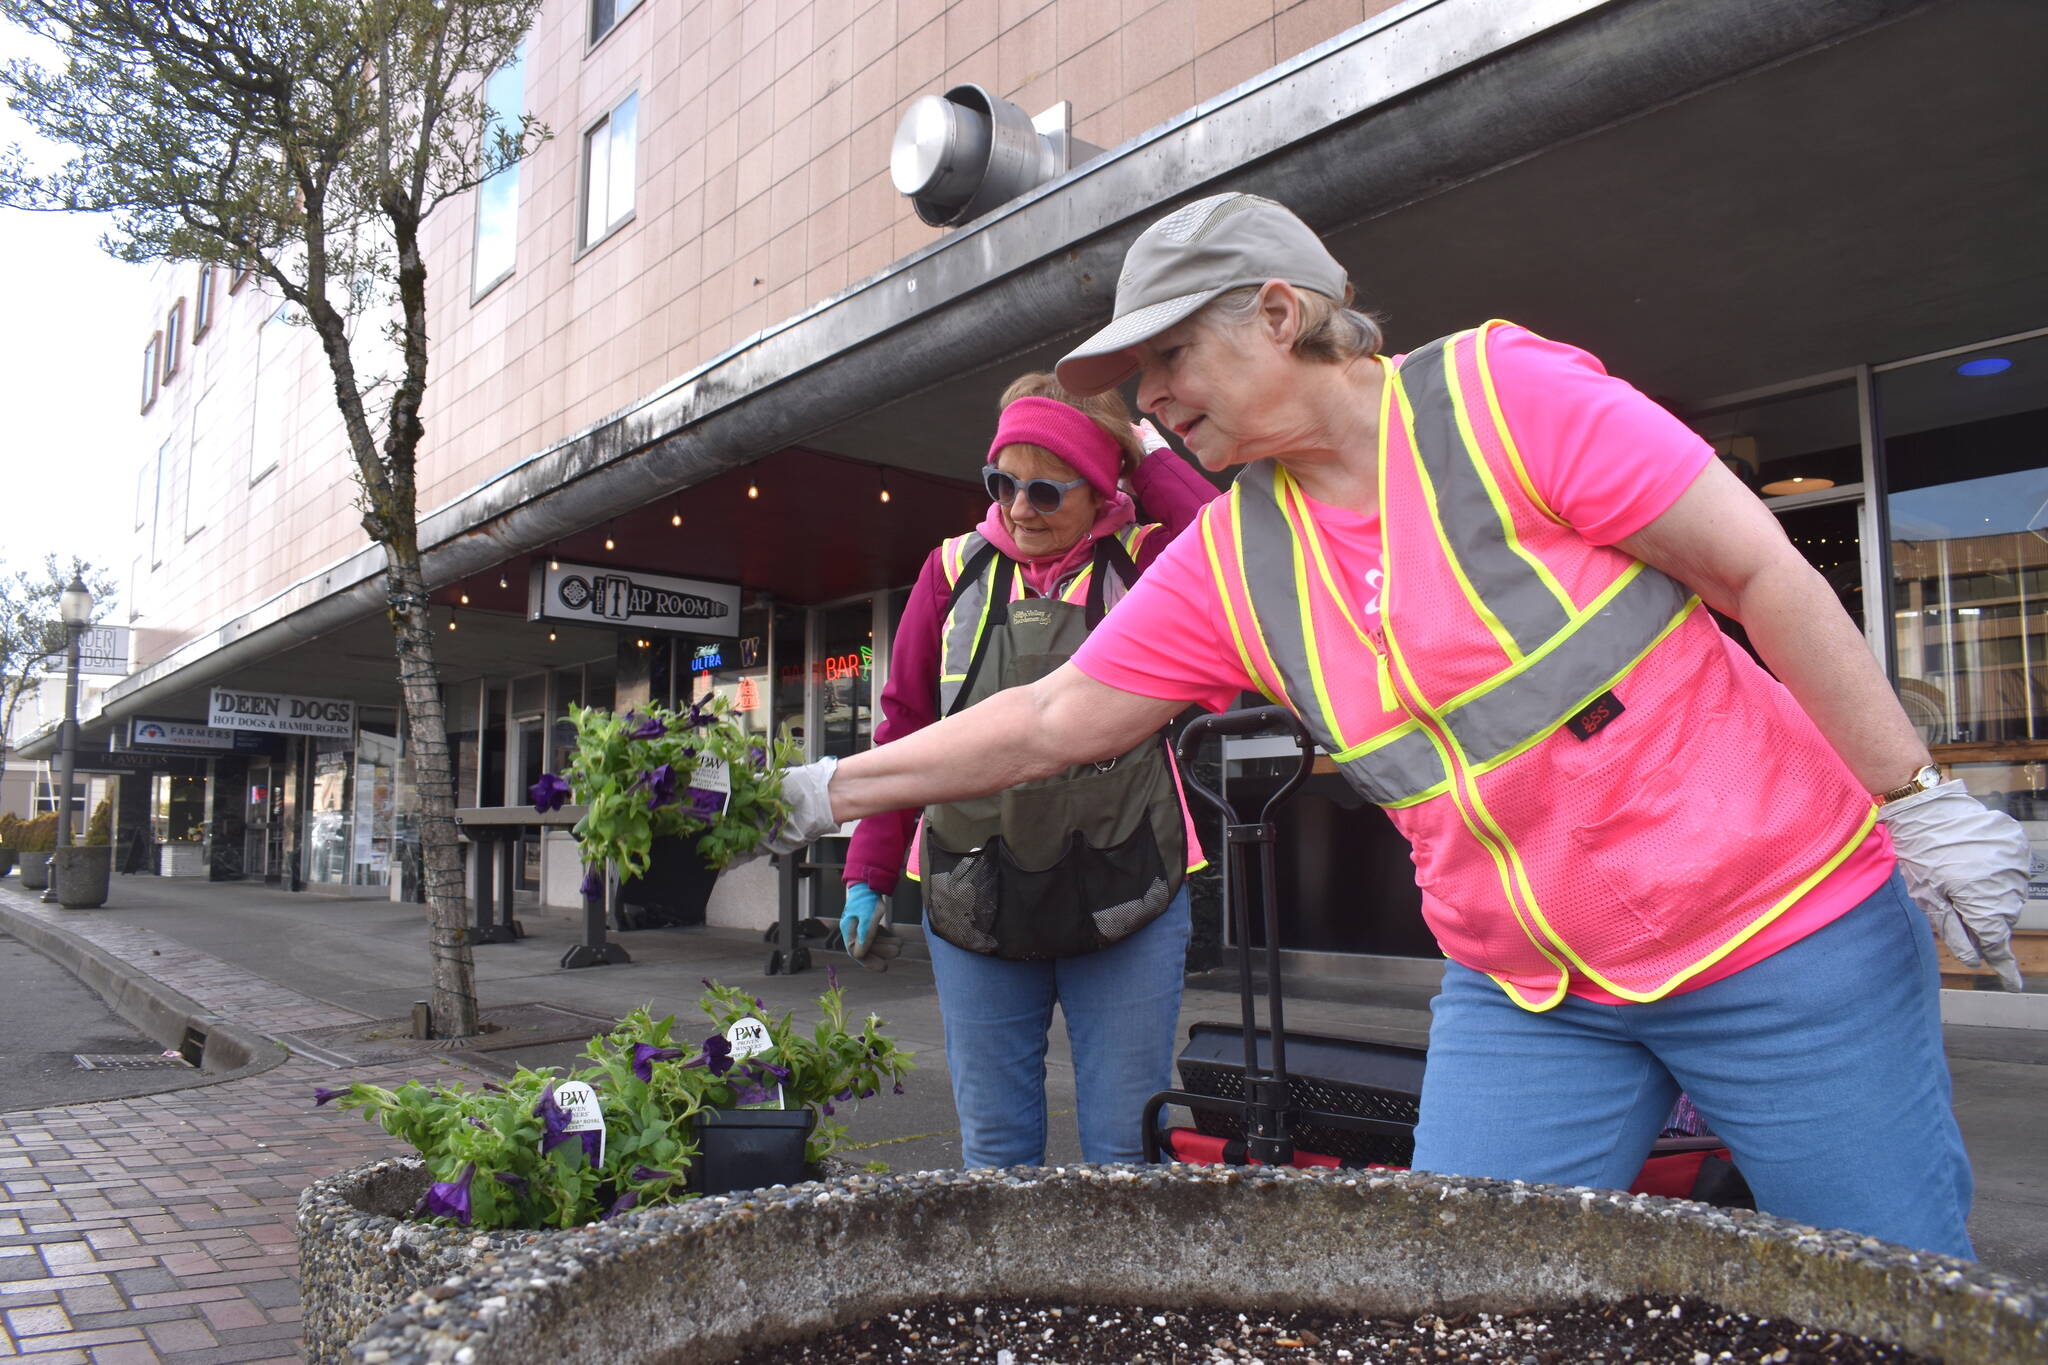 Matthew N. Wells / The Daily World
Bobbi McCracken, left, and Nancy LaCasse, volunteers for Aberdeen Bloom Team, plant Supertunia Royal Velvet Petunia hybrid flowers in the 100 block of East Wishkah Street. McCracken, along with Bette Worth, her partner on many projects throughout the city, helped start Aberdeen Bloom Team in 2014. It doesn’t sound like they’ll stop anytime soon as residents seem to enjoy the fruits of their labor.